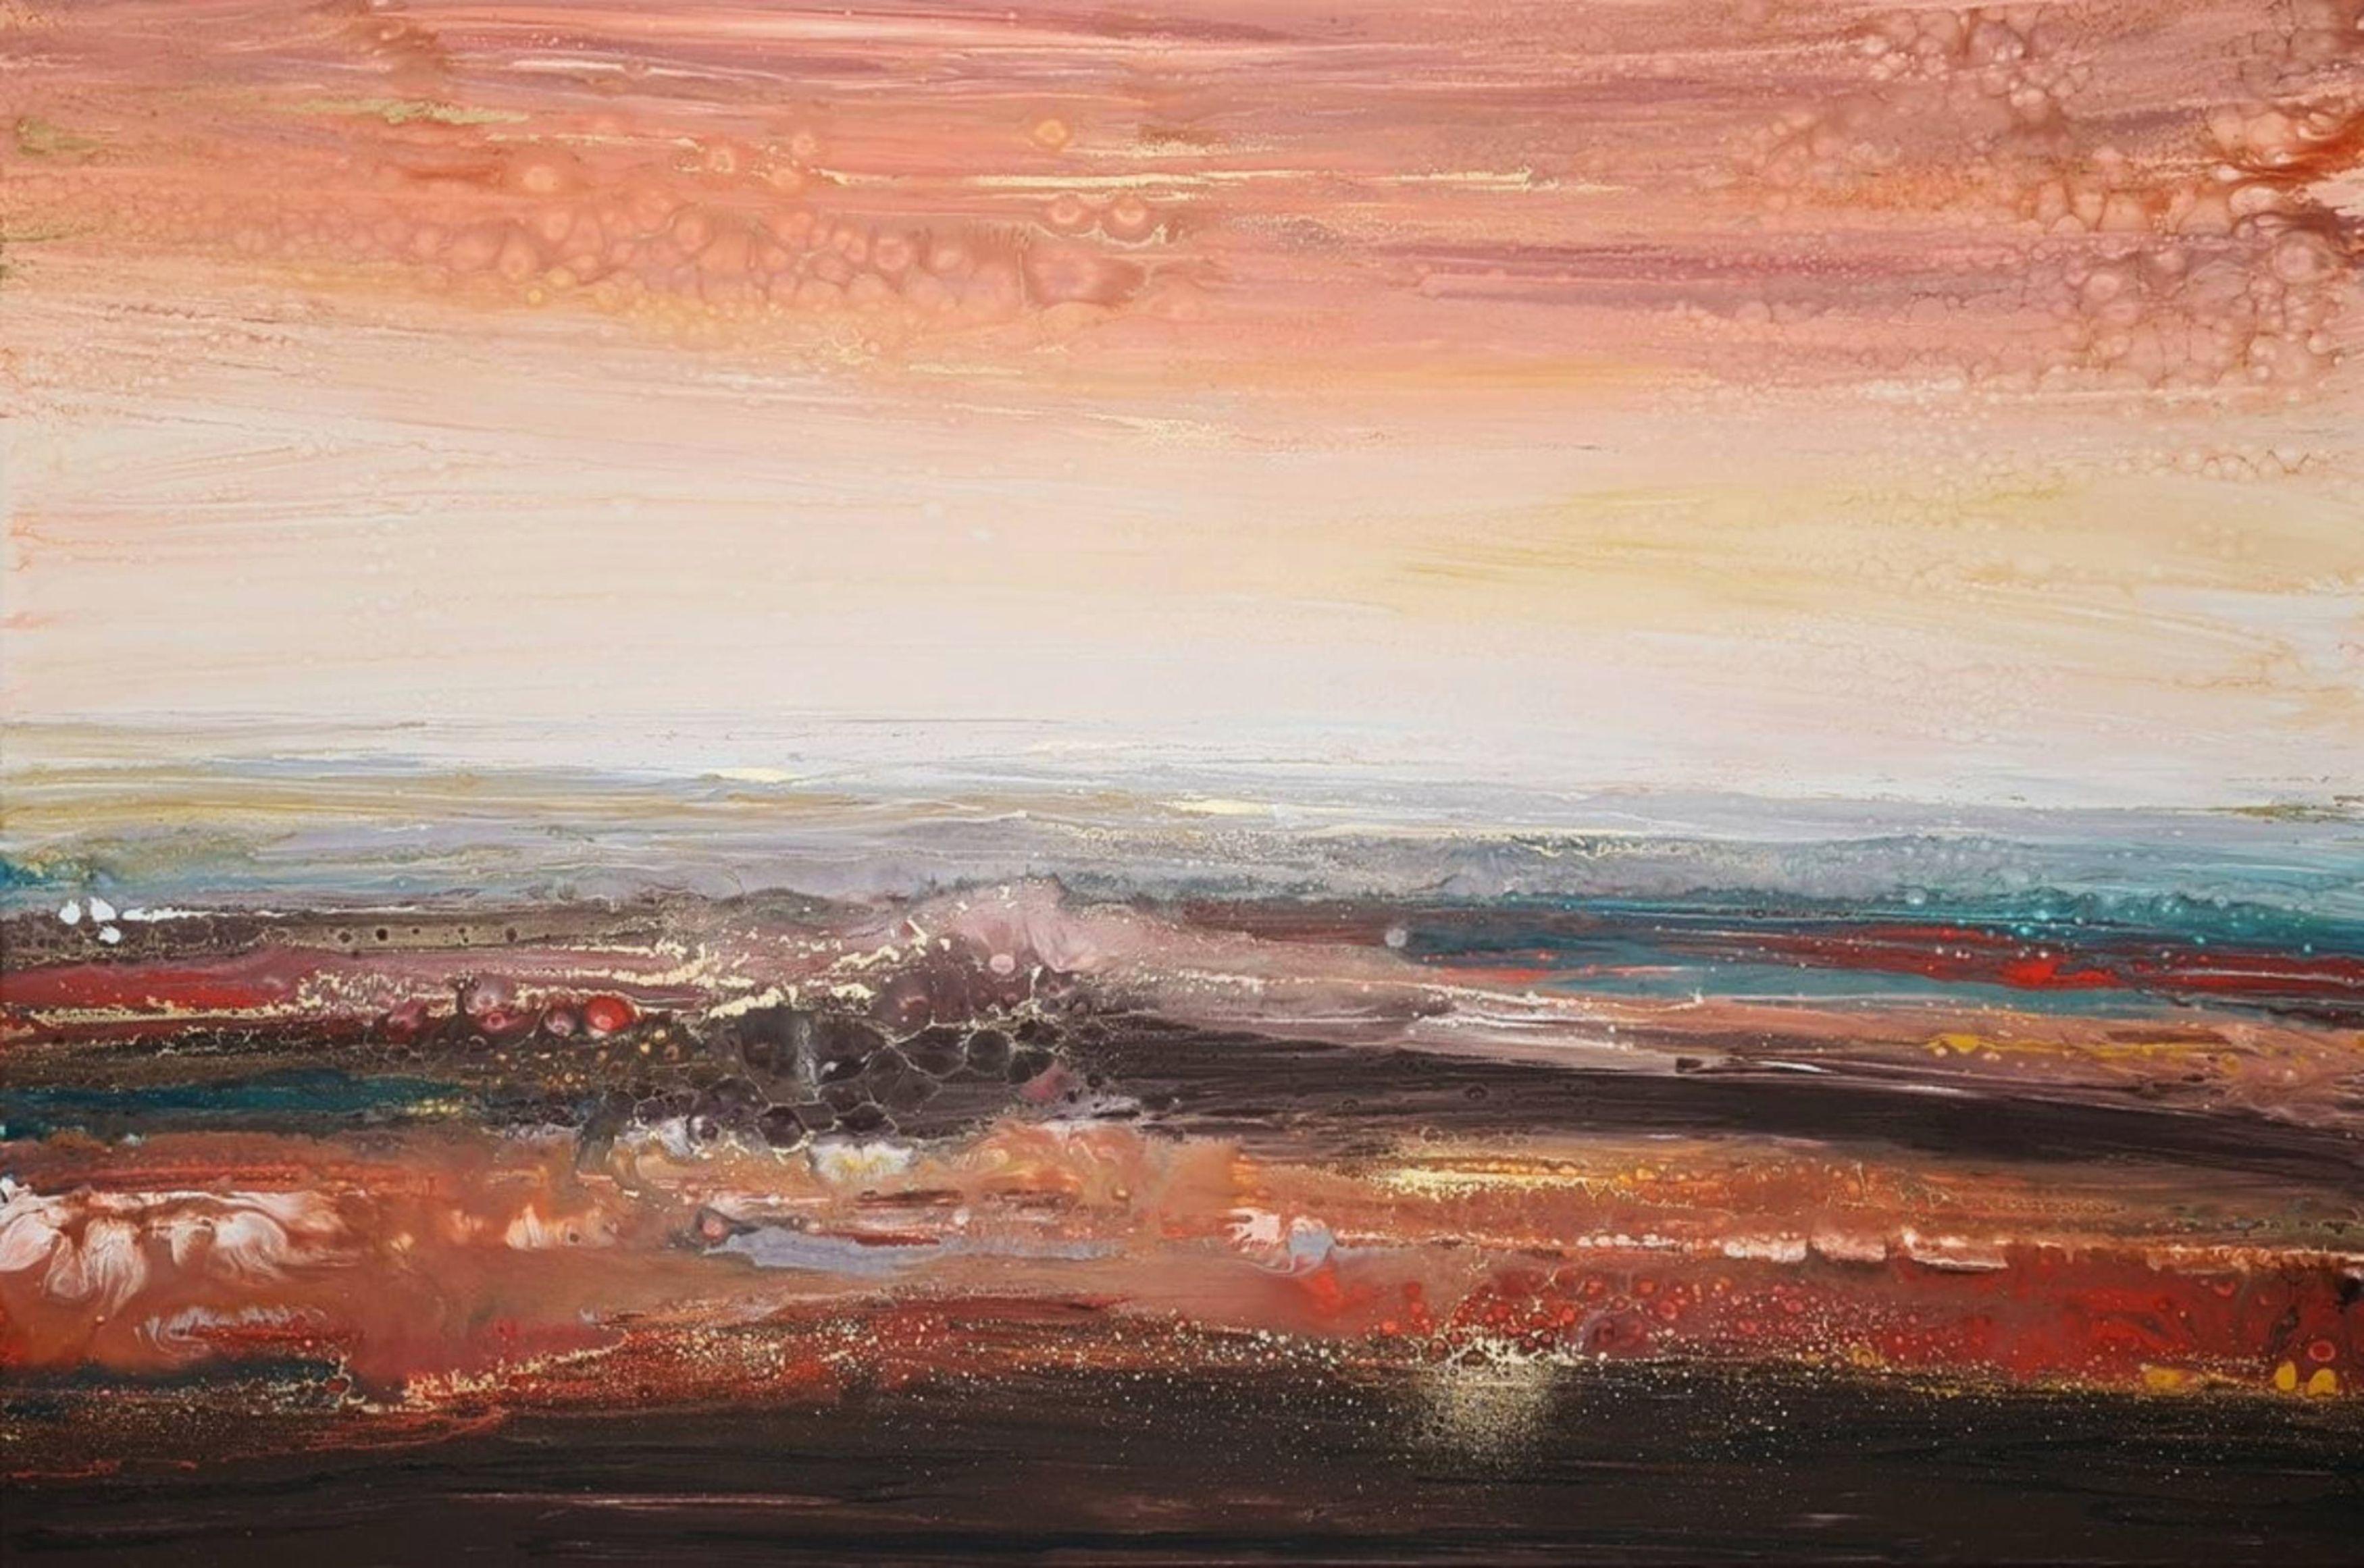 The dawn chorus of melodic birdsong drifted in. The rising sun cast a rosy hue across the morning sky.  This is an original abstract painting in shades of terracotta, orange,teal, light grey,brown and gold  Colors of the horizon in dawn ,warm colors